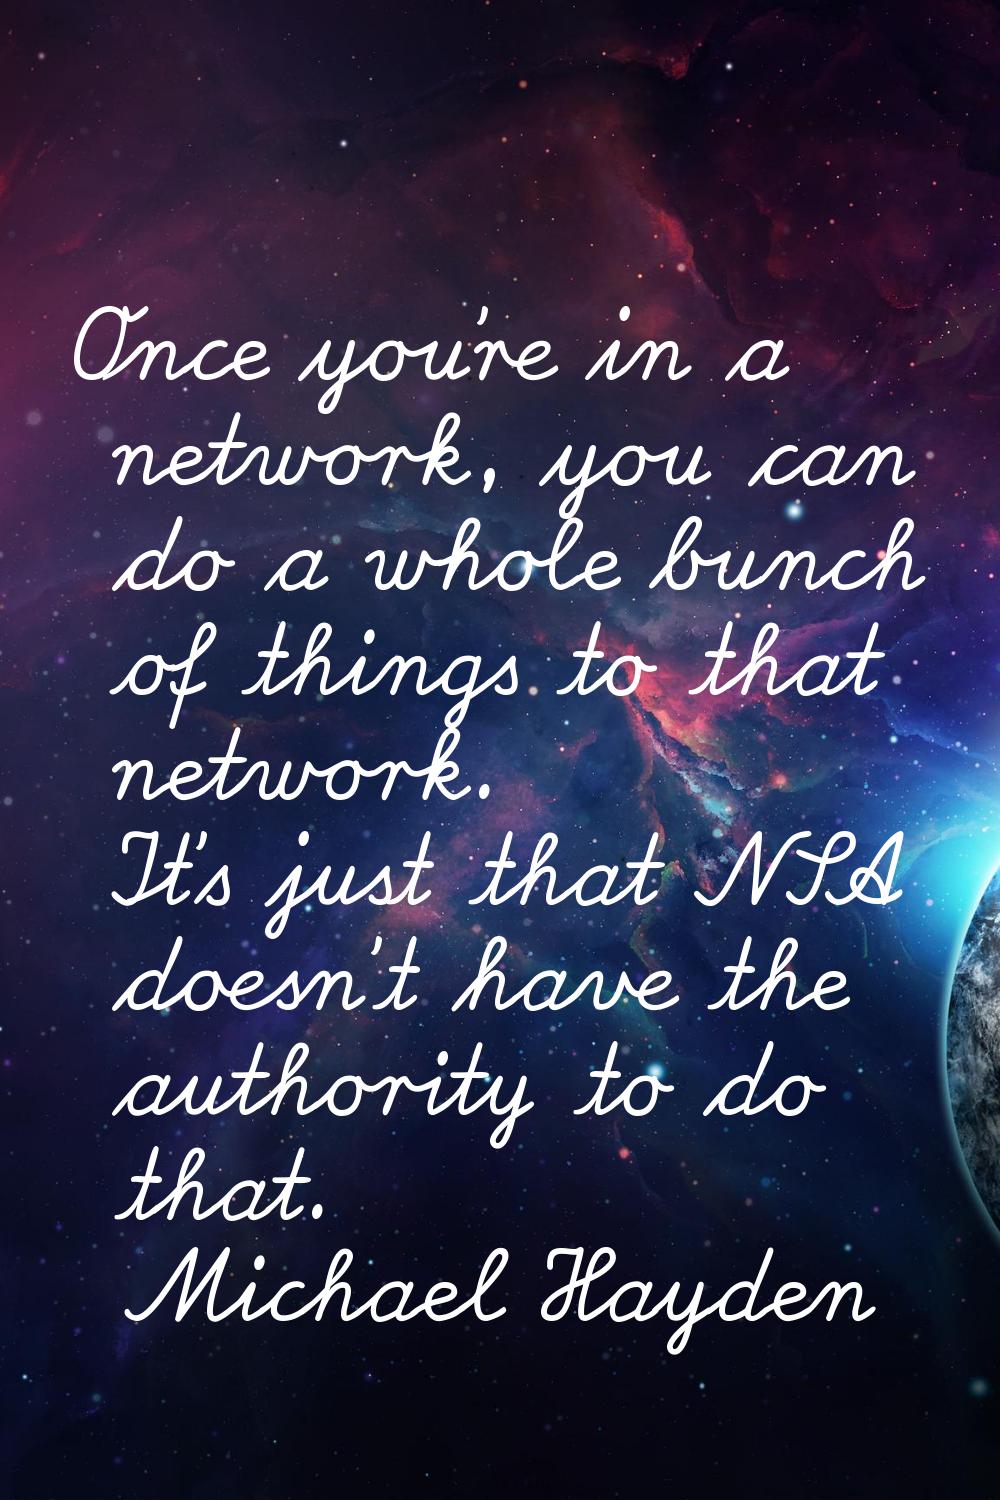 Once you're in a network, you can do a whole bunch of things to that network. It's just that NSA do